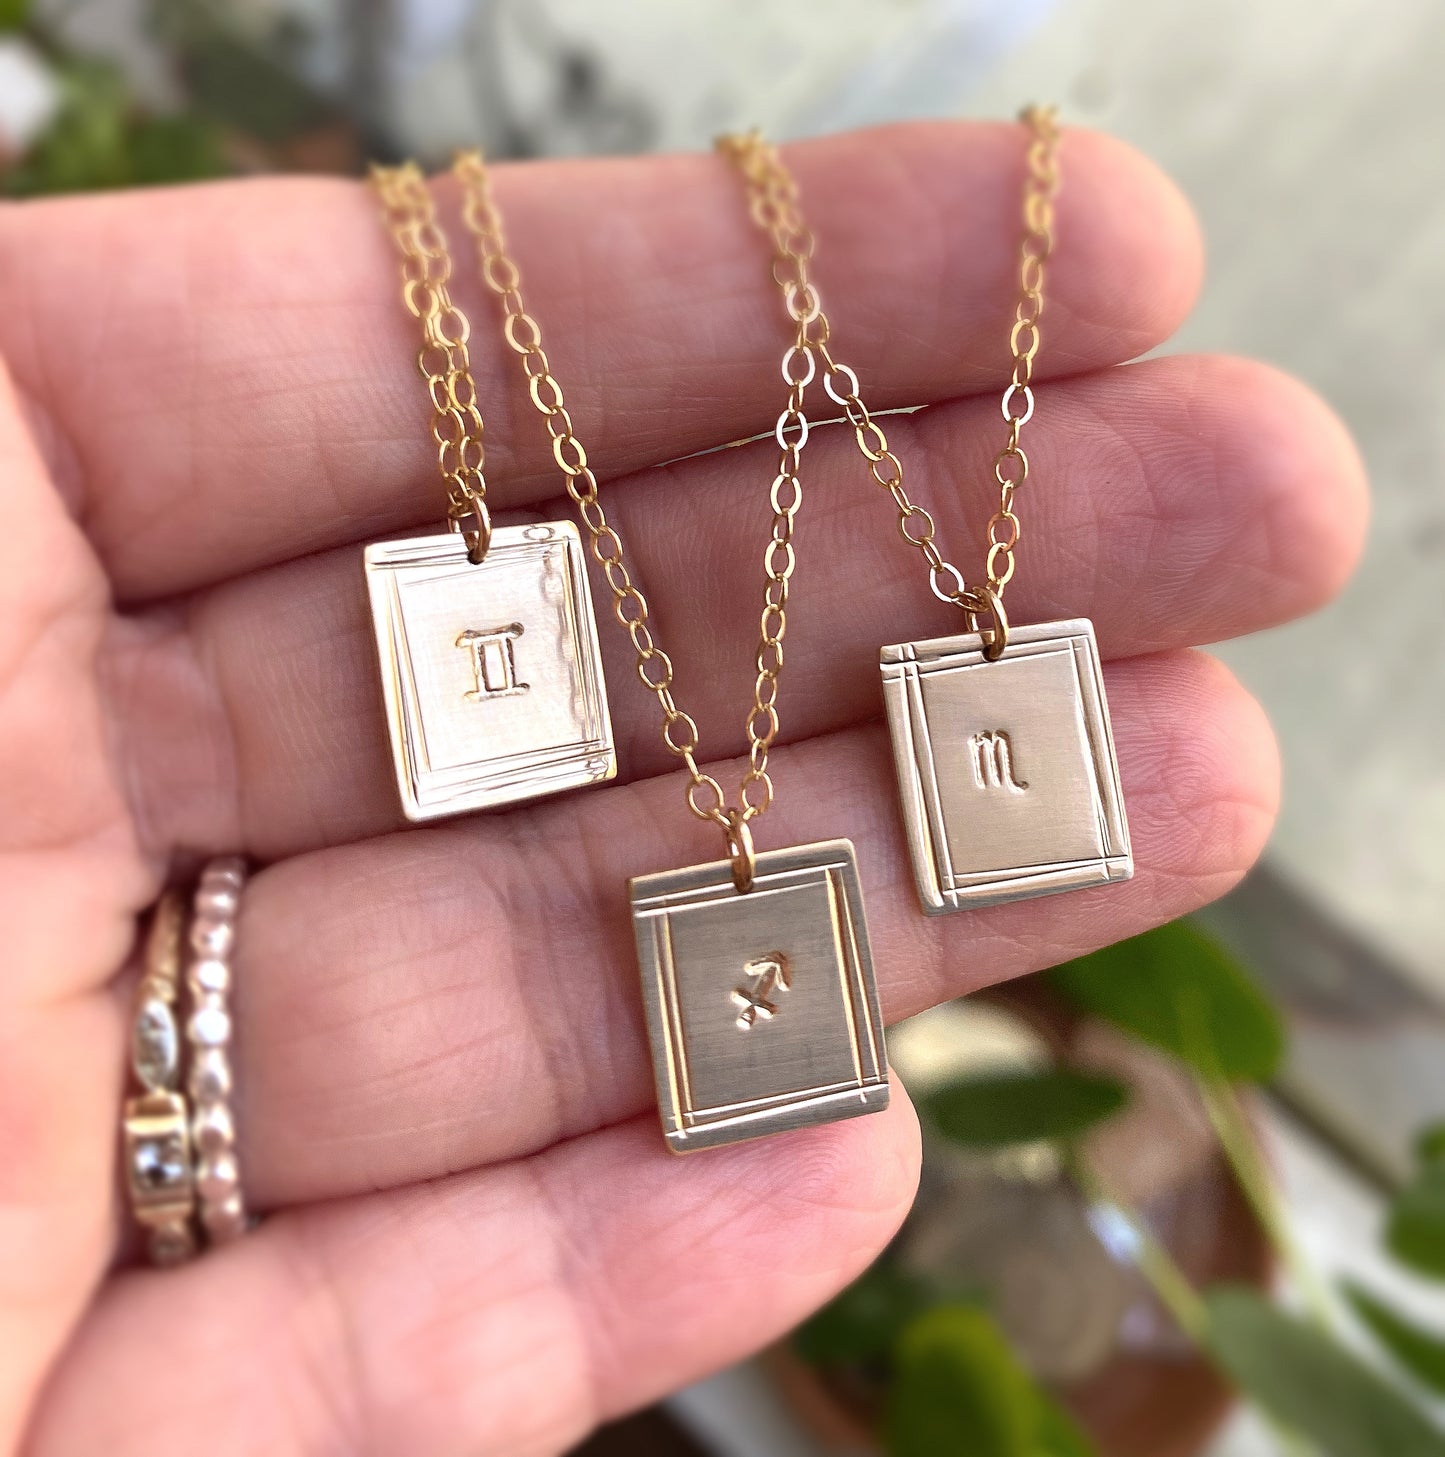 custom zodiac sign necklaces in gold filled draped across a hand